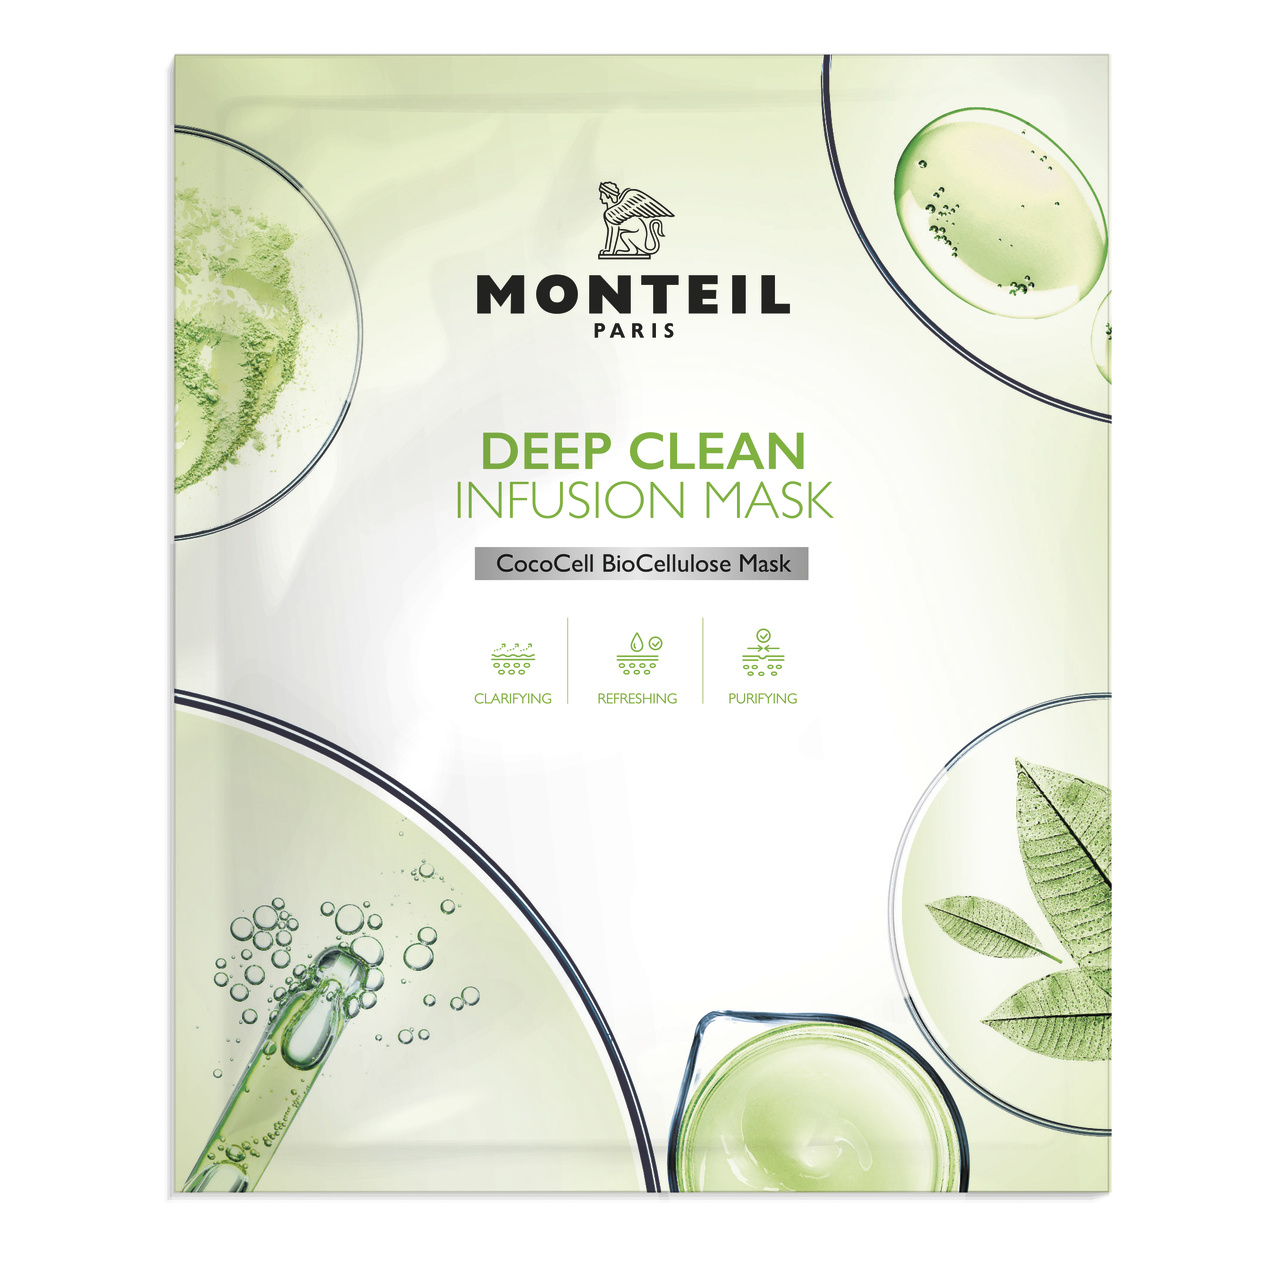 Deep Clean Infusion Mask